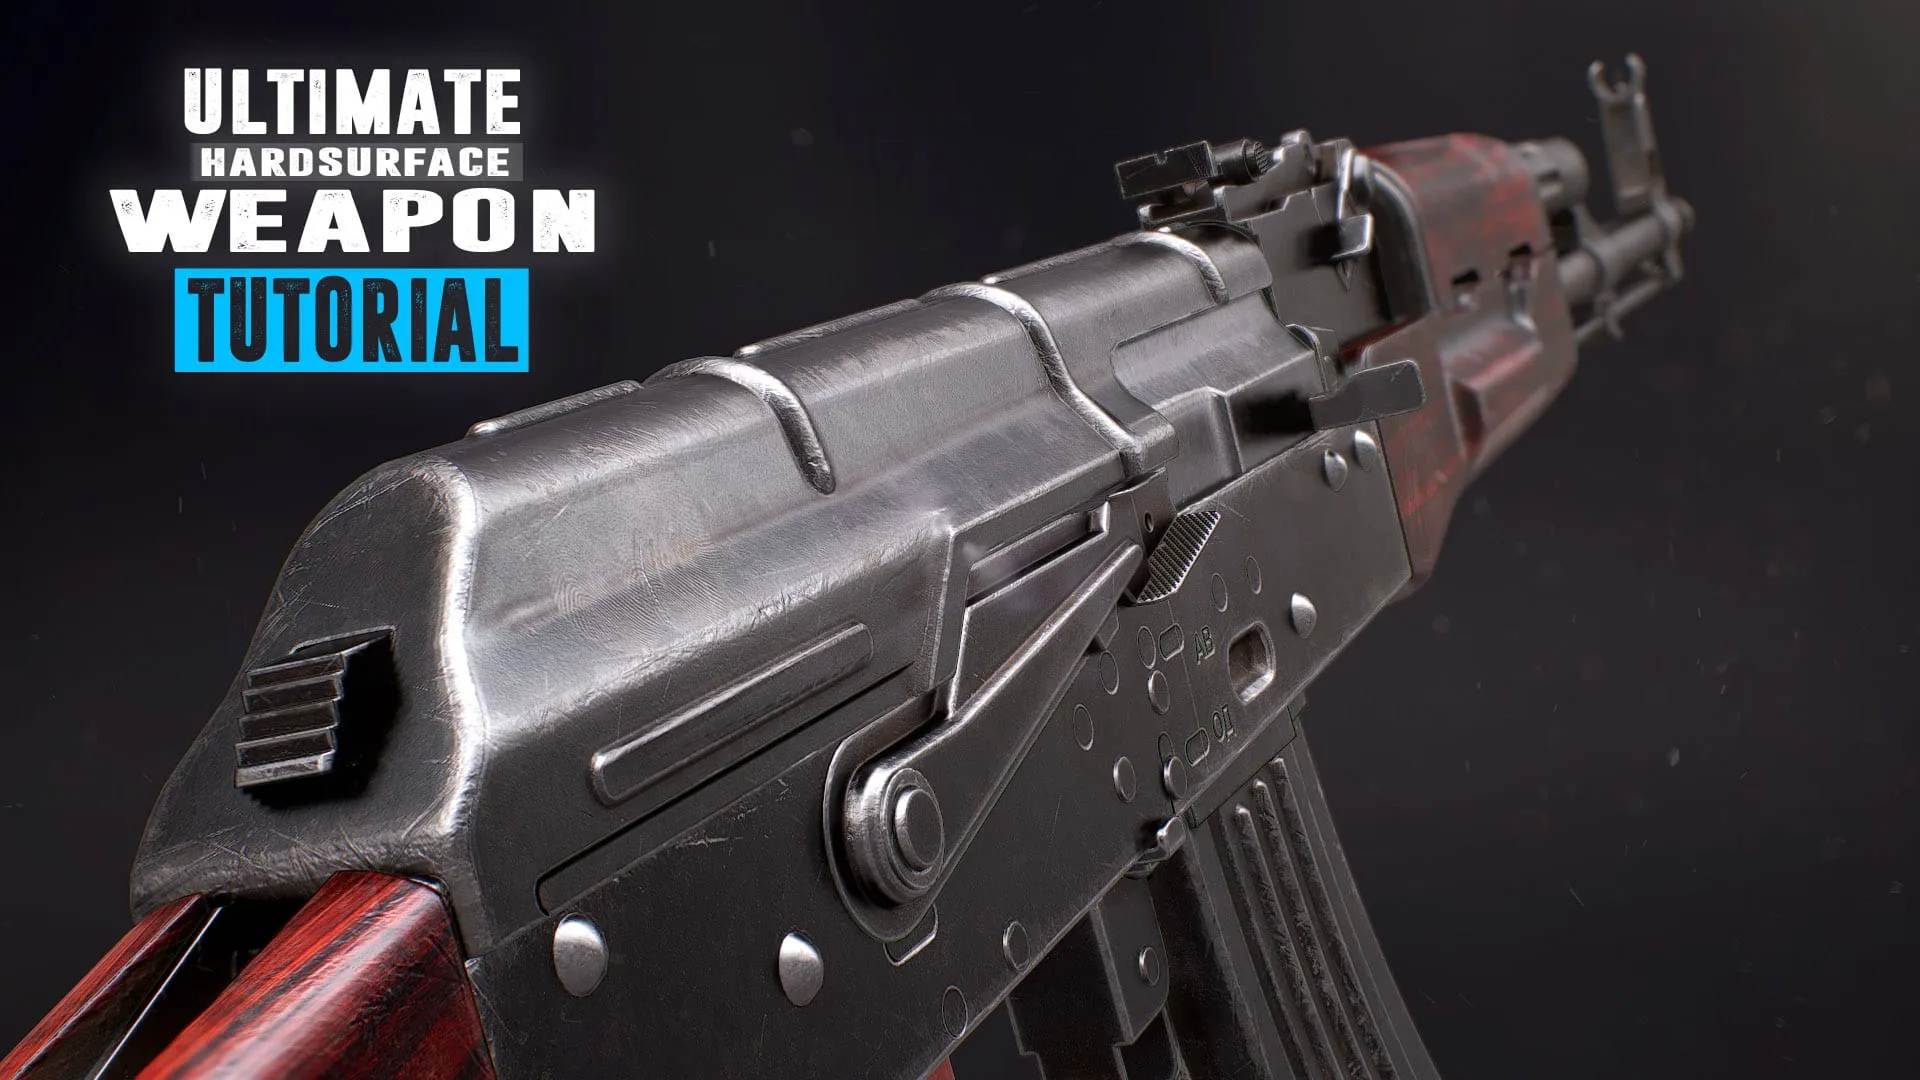 Ultimate Weapon Tutorial - Complete Edition - 3Ds Max/Substance Painter/Marmoset - 2023 Free Public release